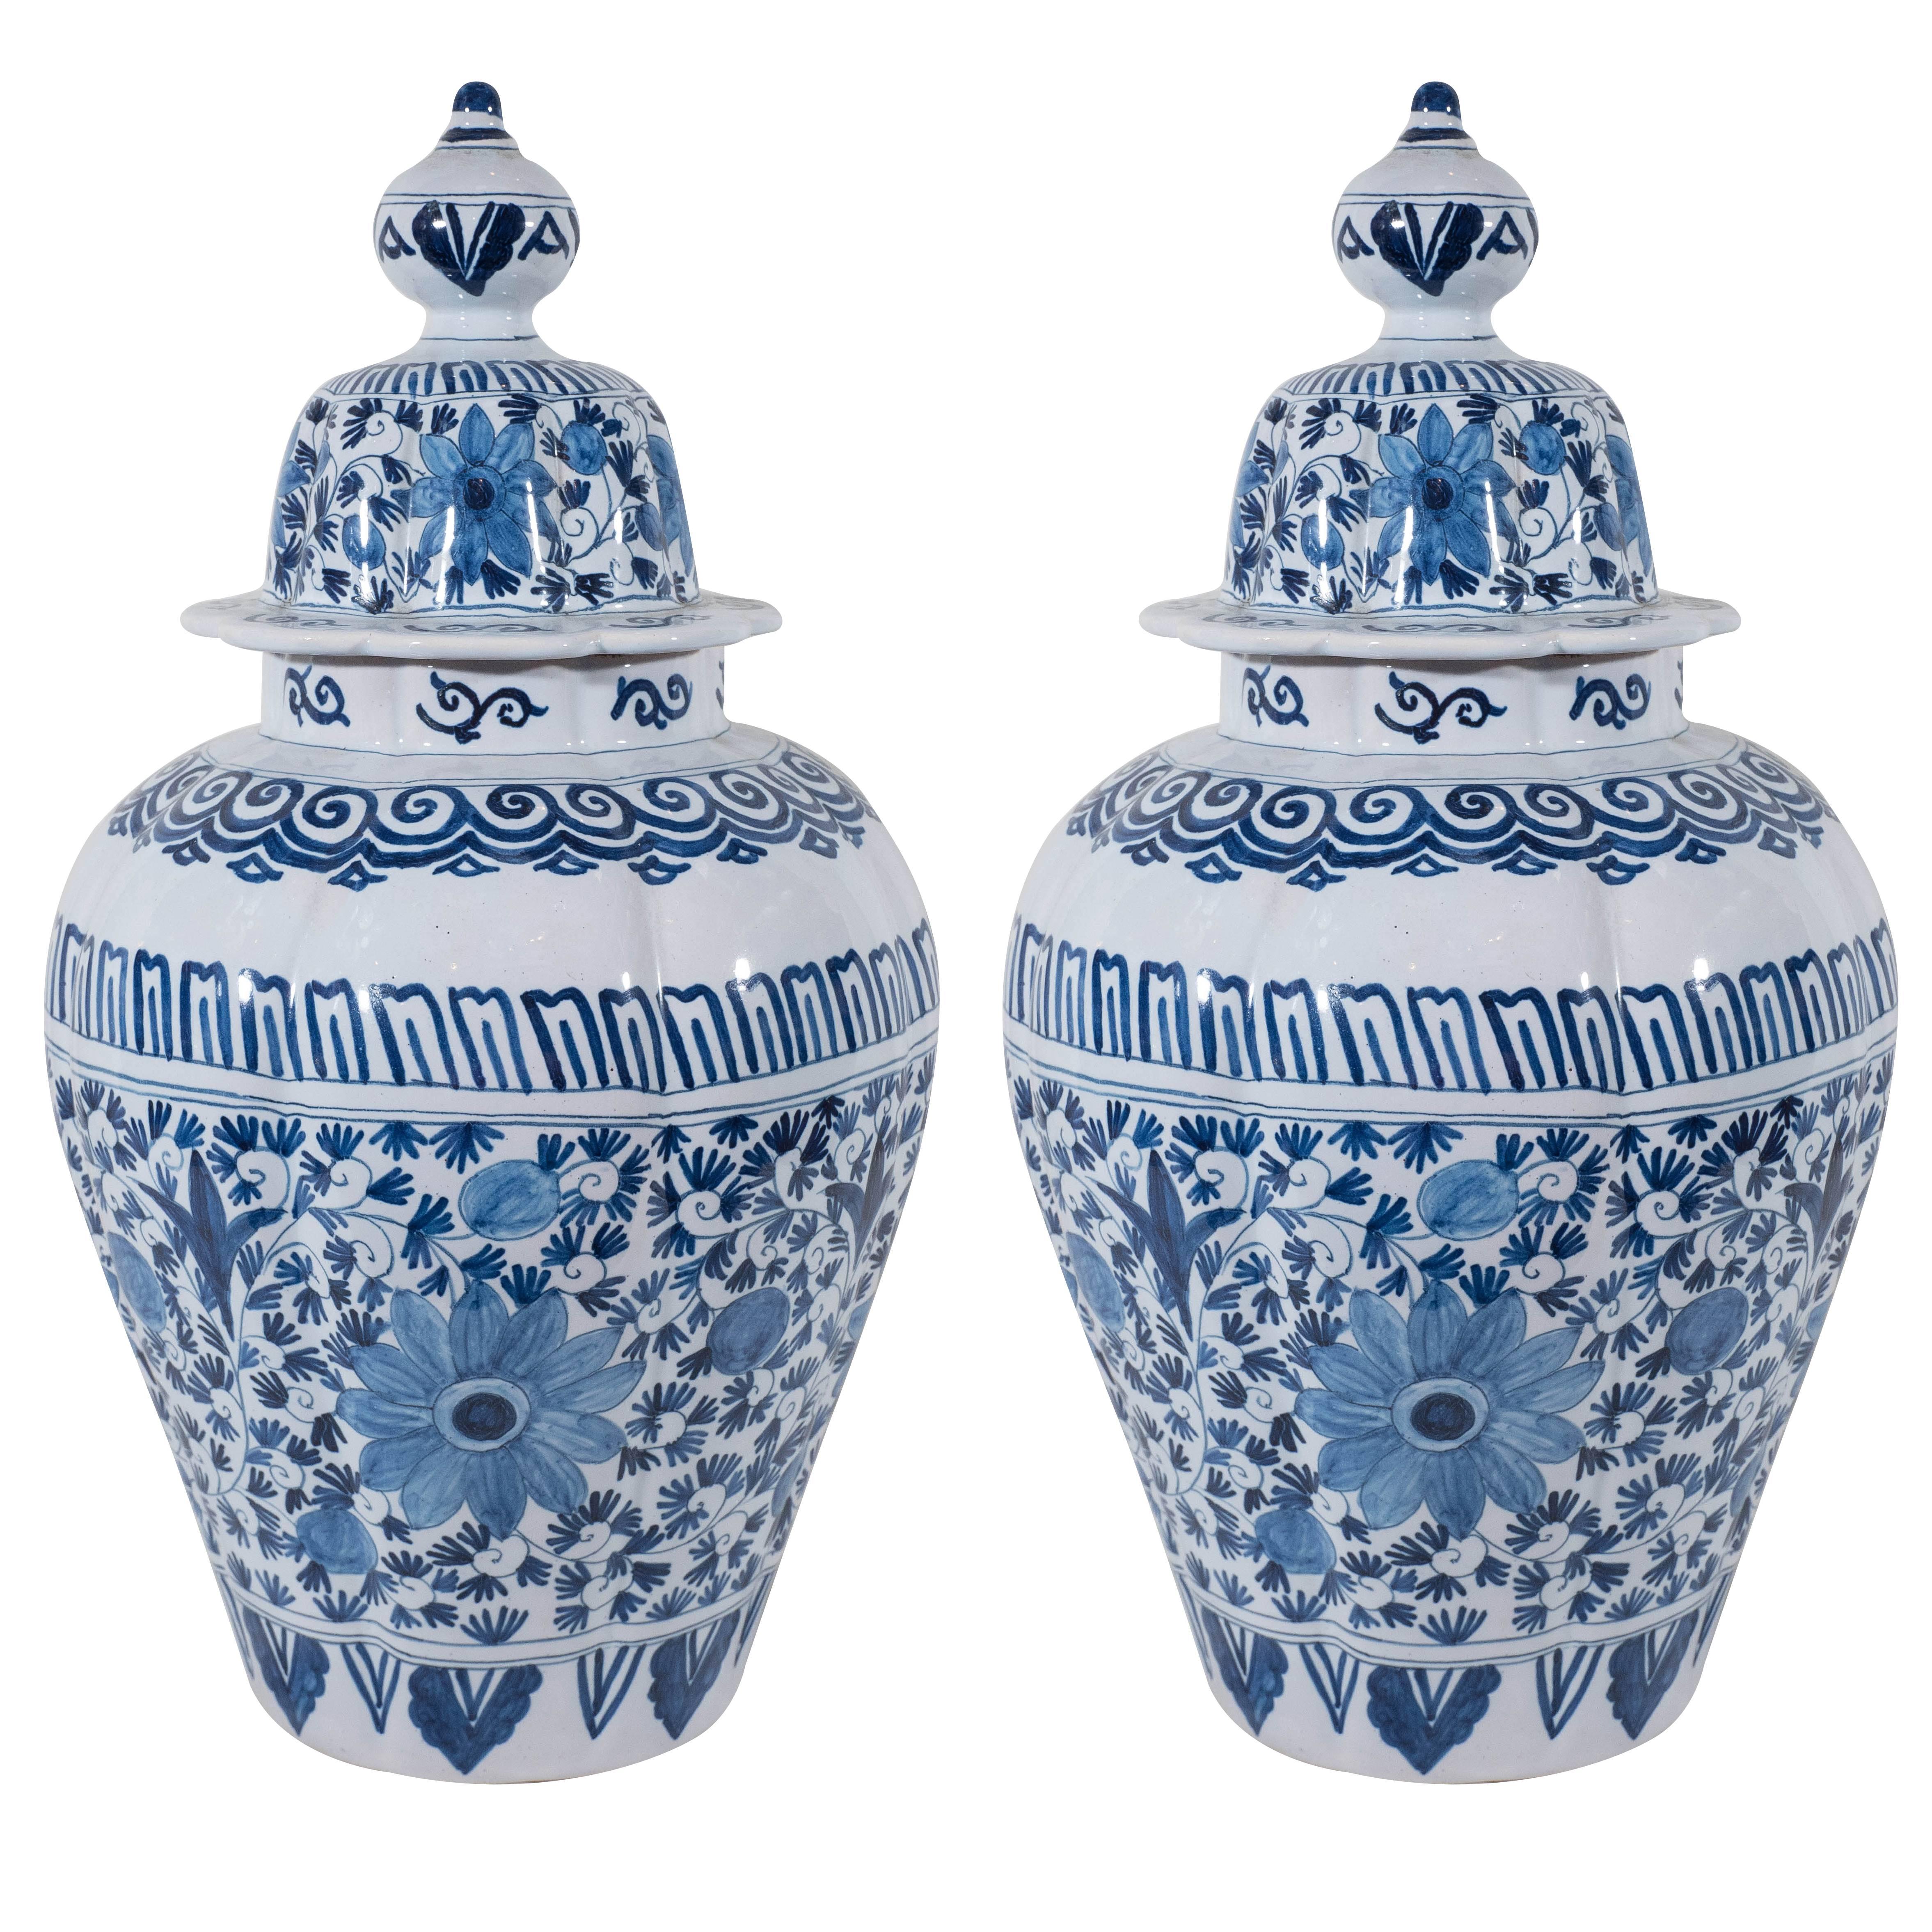 Pair of Blue and White Delft Jars